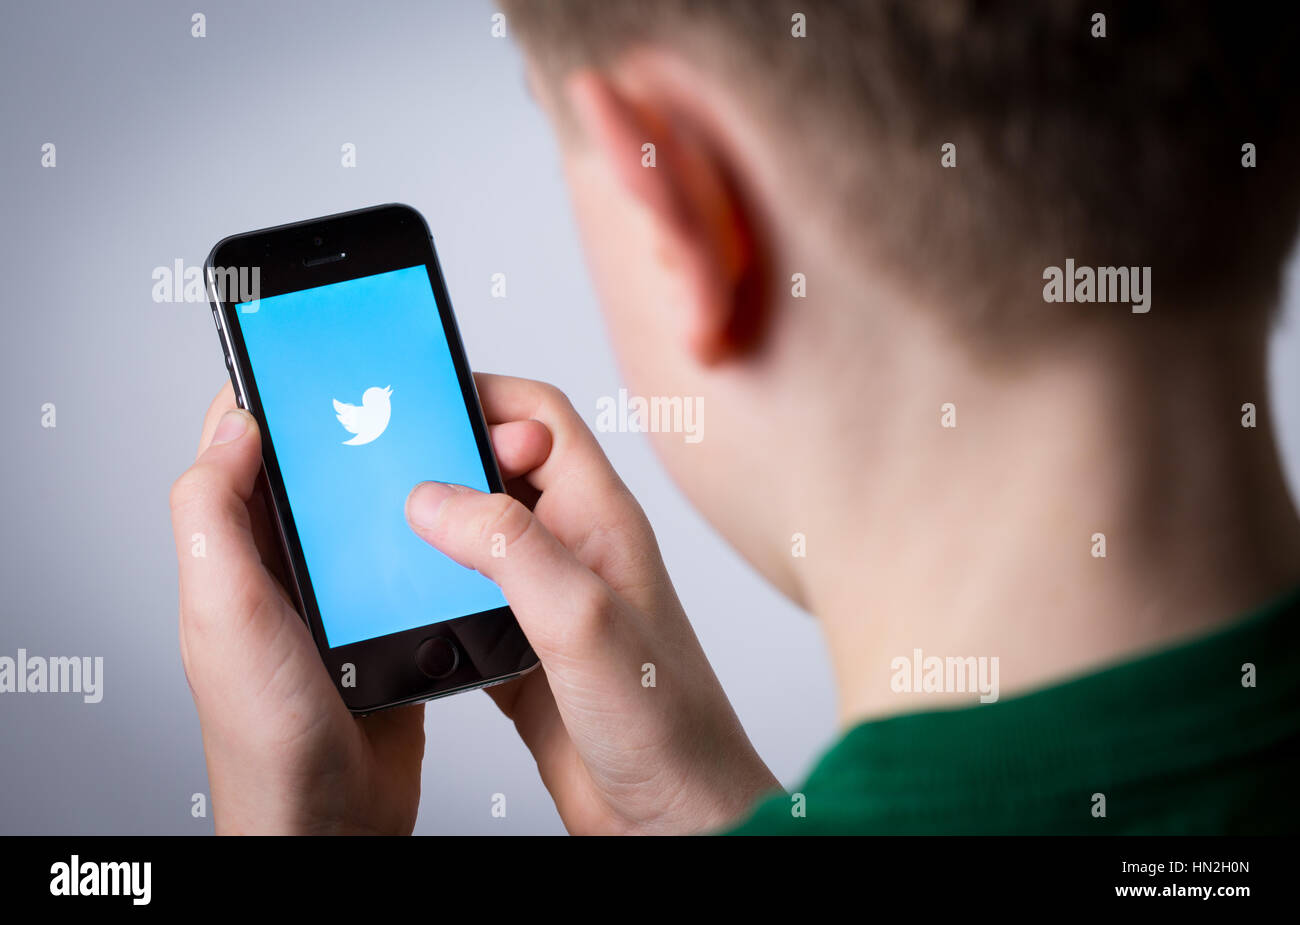 A teenage boy using Twitter on a mobile phone Stock Photo